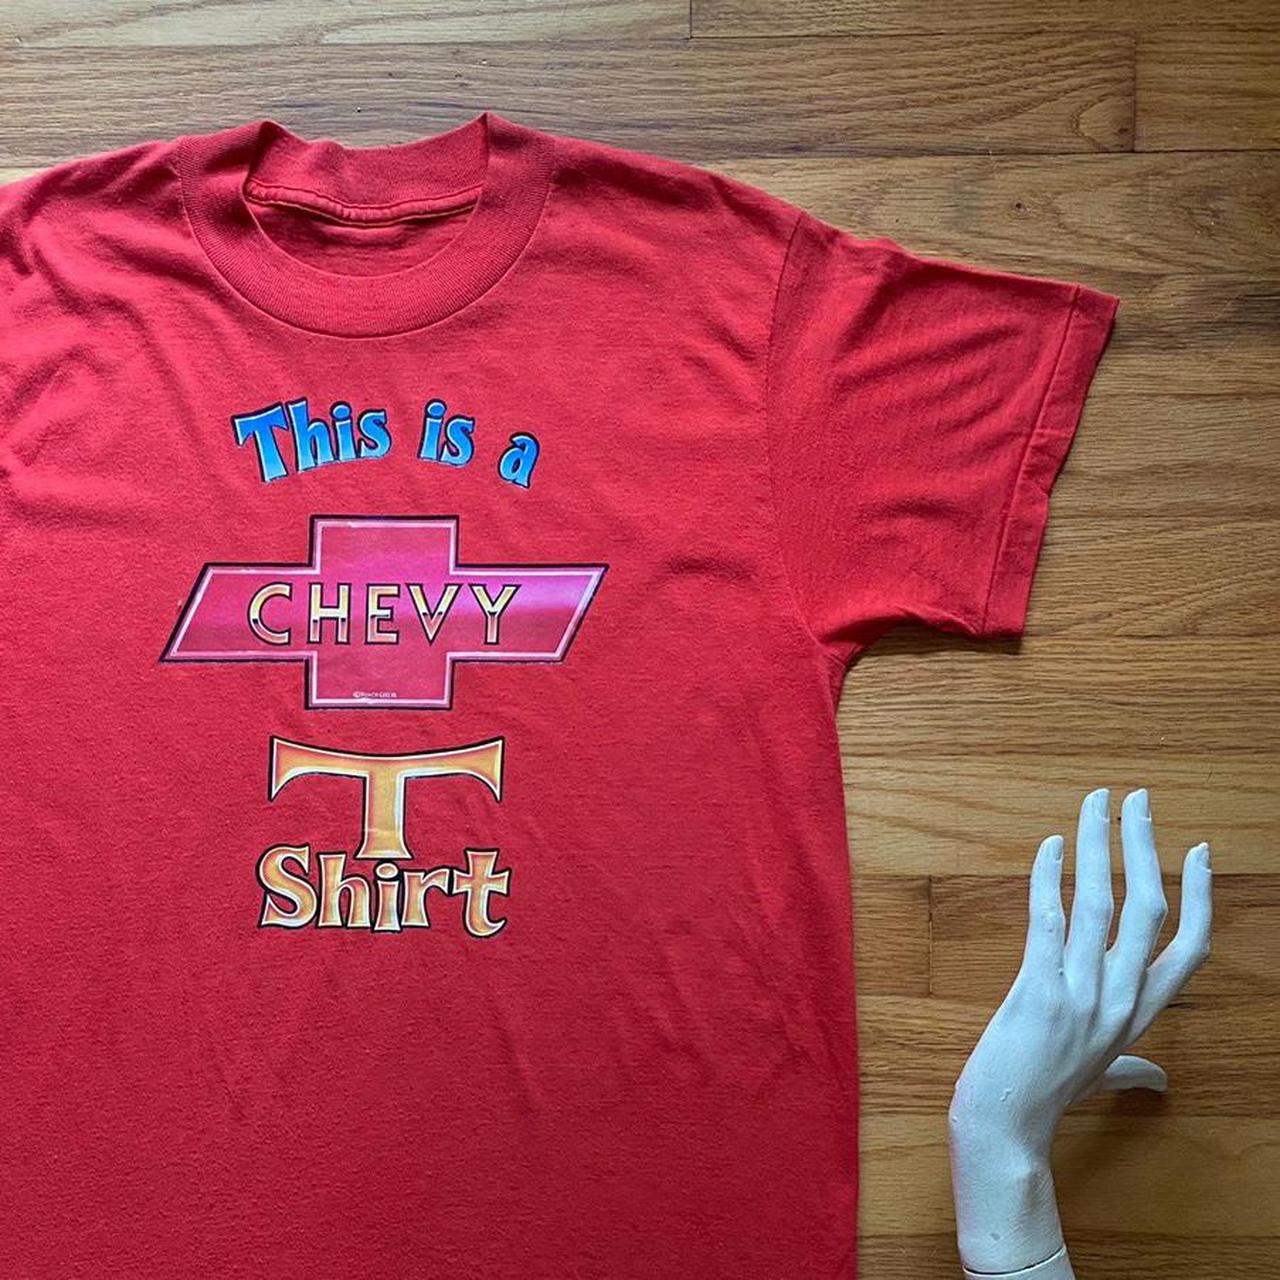 Product Image 1 - 70s 80s tshirt. “THIS IS